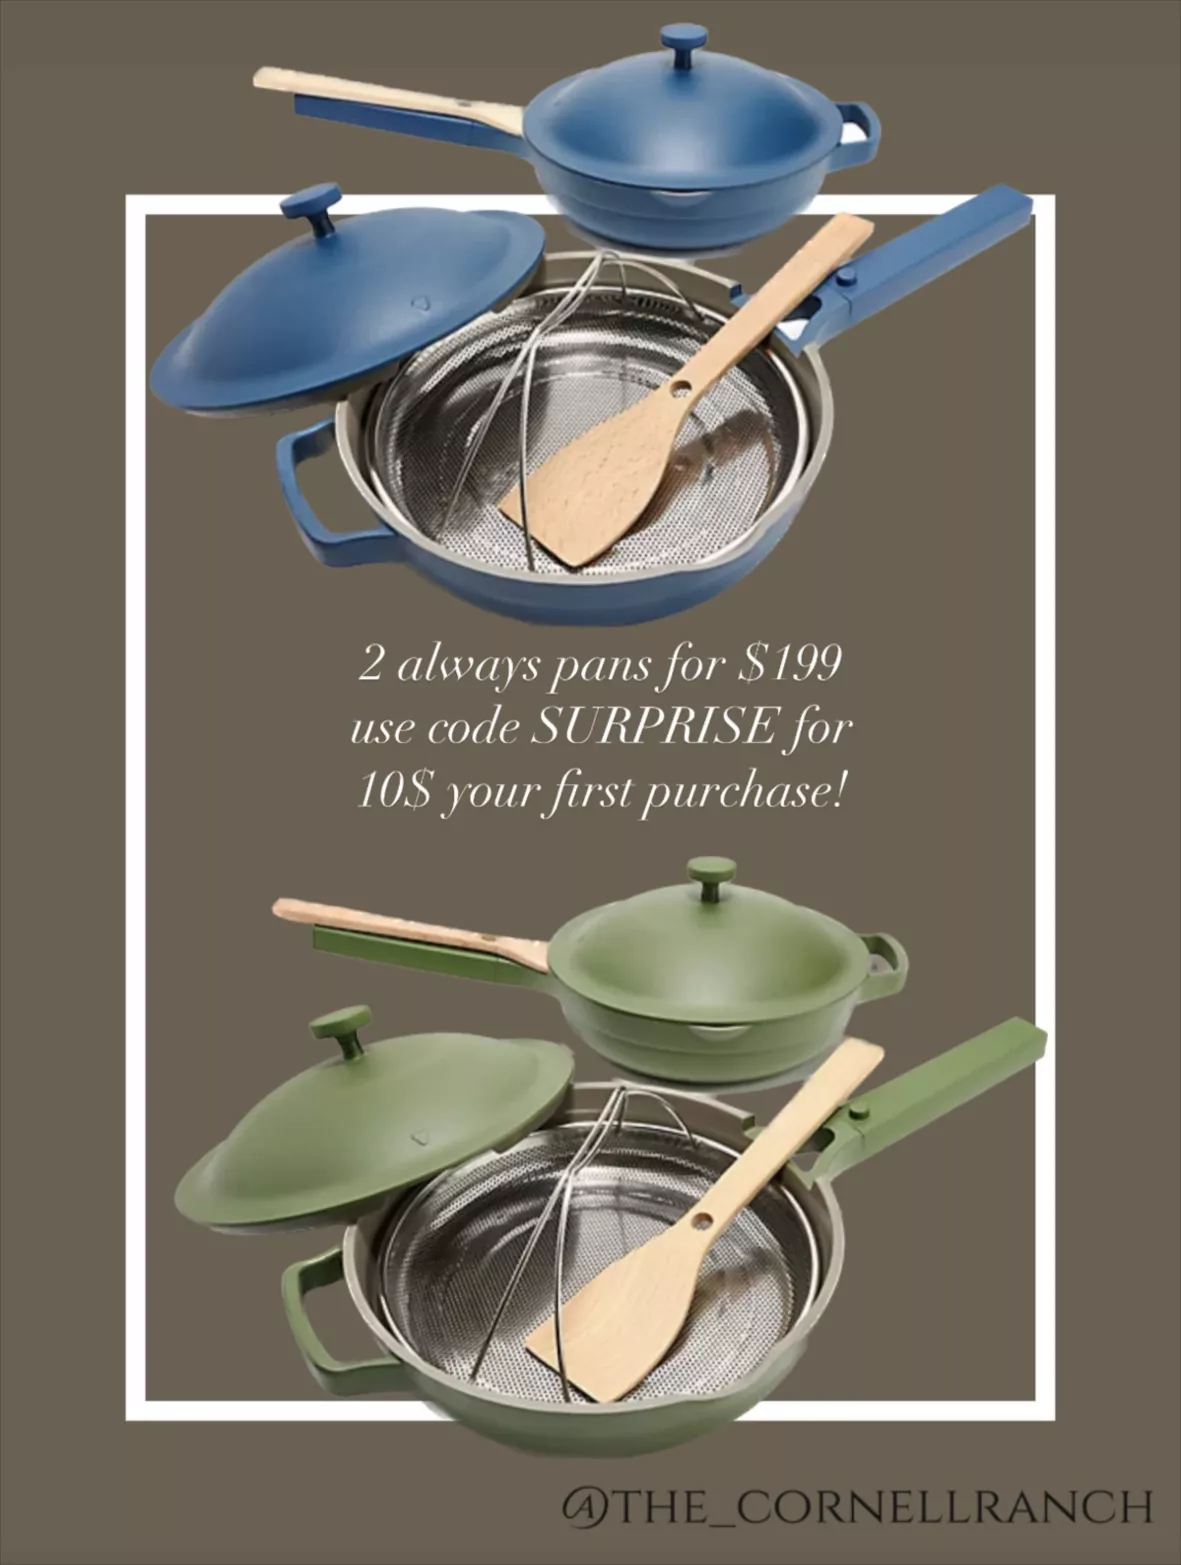 Our Place Set of 2 8-in-1 Nonstick Ceramic Always Pans on QVC 